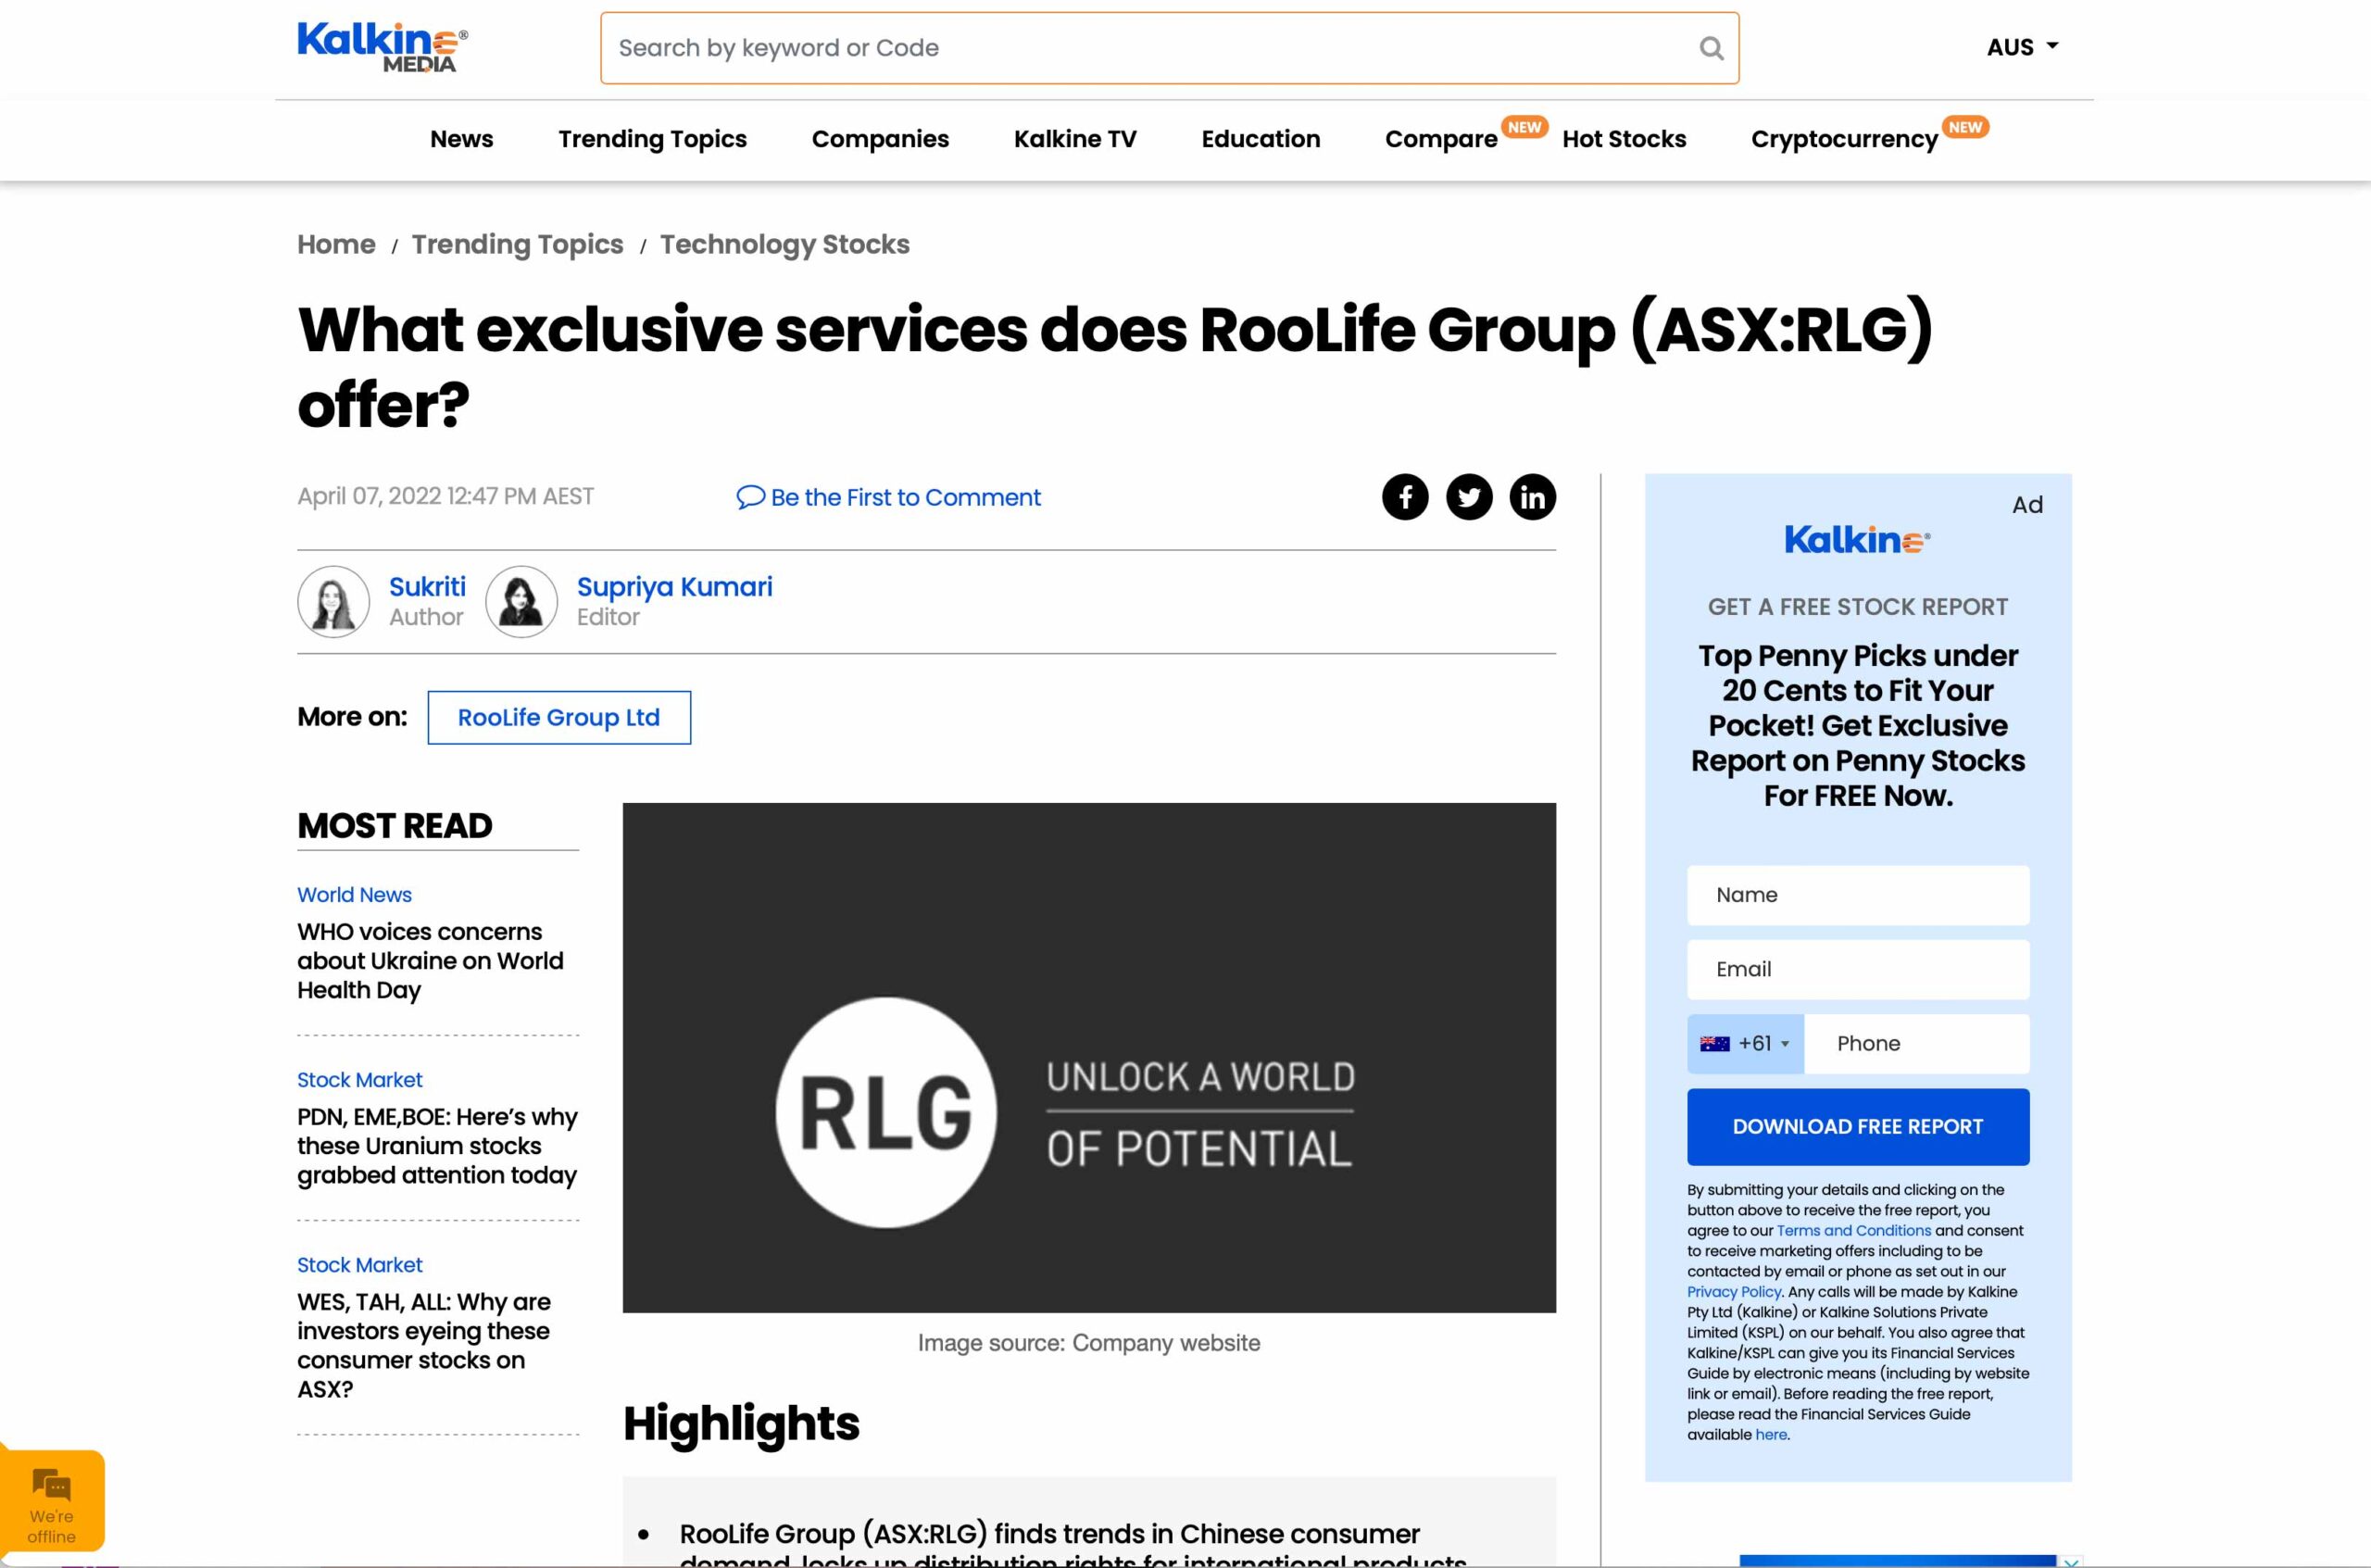 Featured image for “Kalkine Media: What exclusive services does RooLife Group (ASX:RLG) offer?”